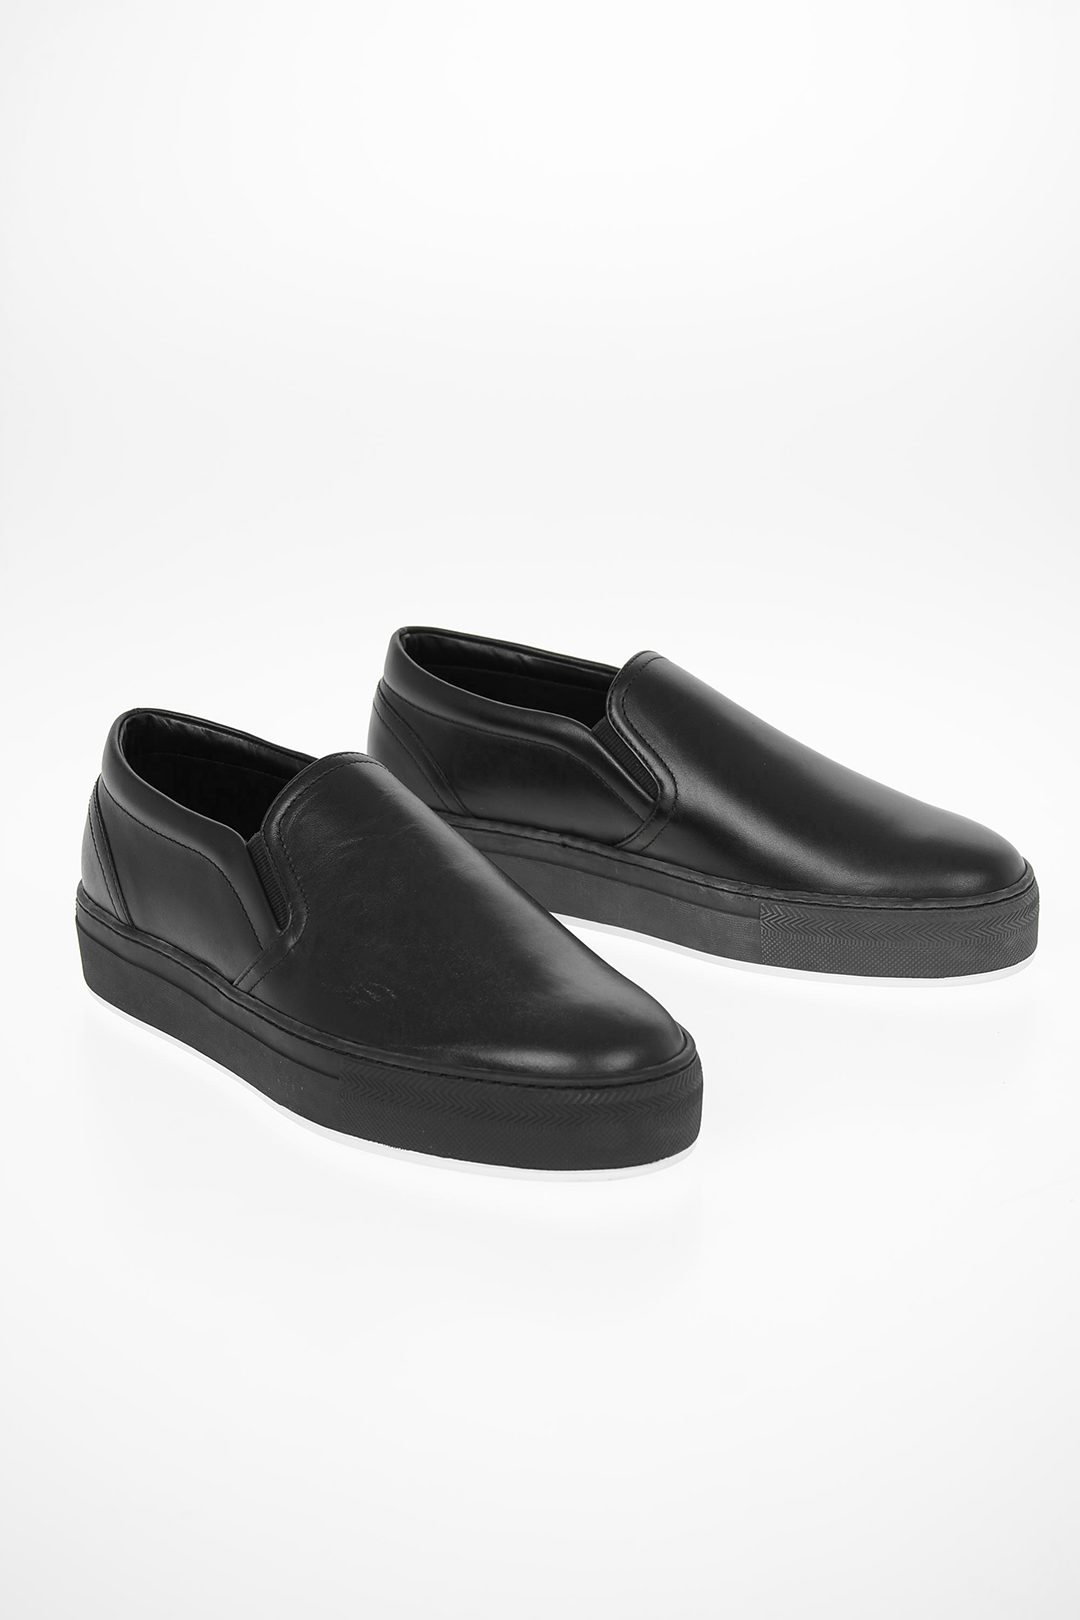 Armani COLLEZIONI Leather Slip On Sneakers men - Glamood Outlet